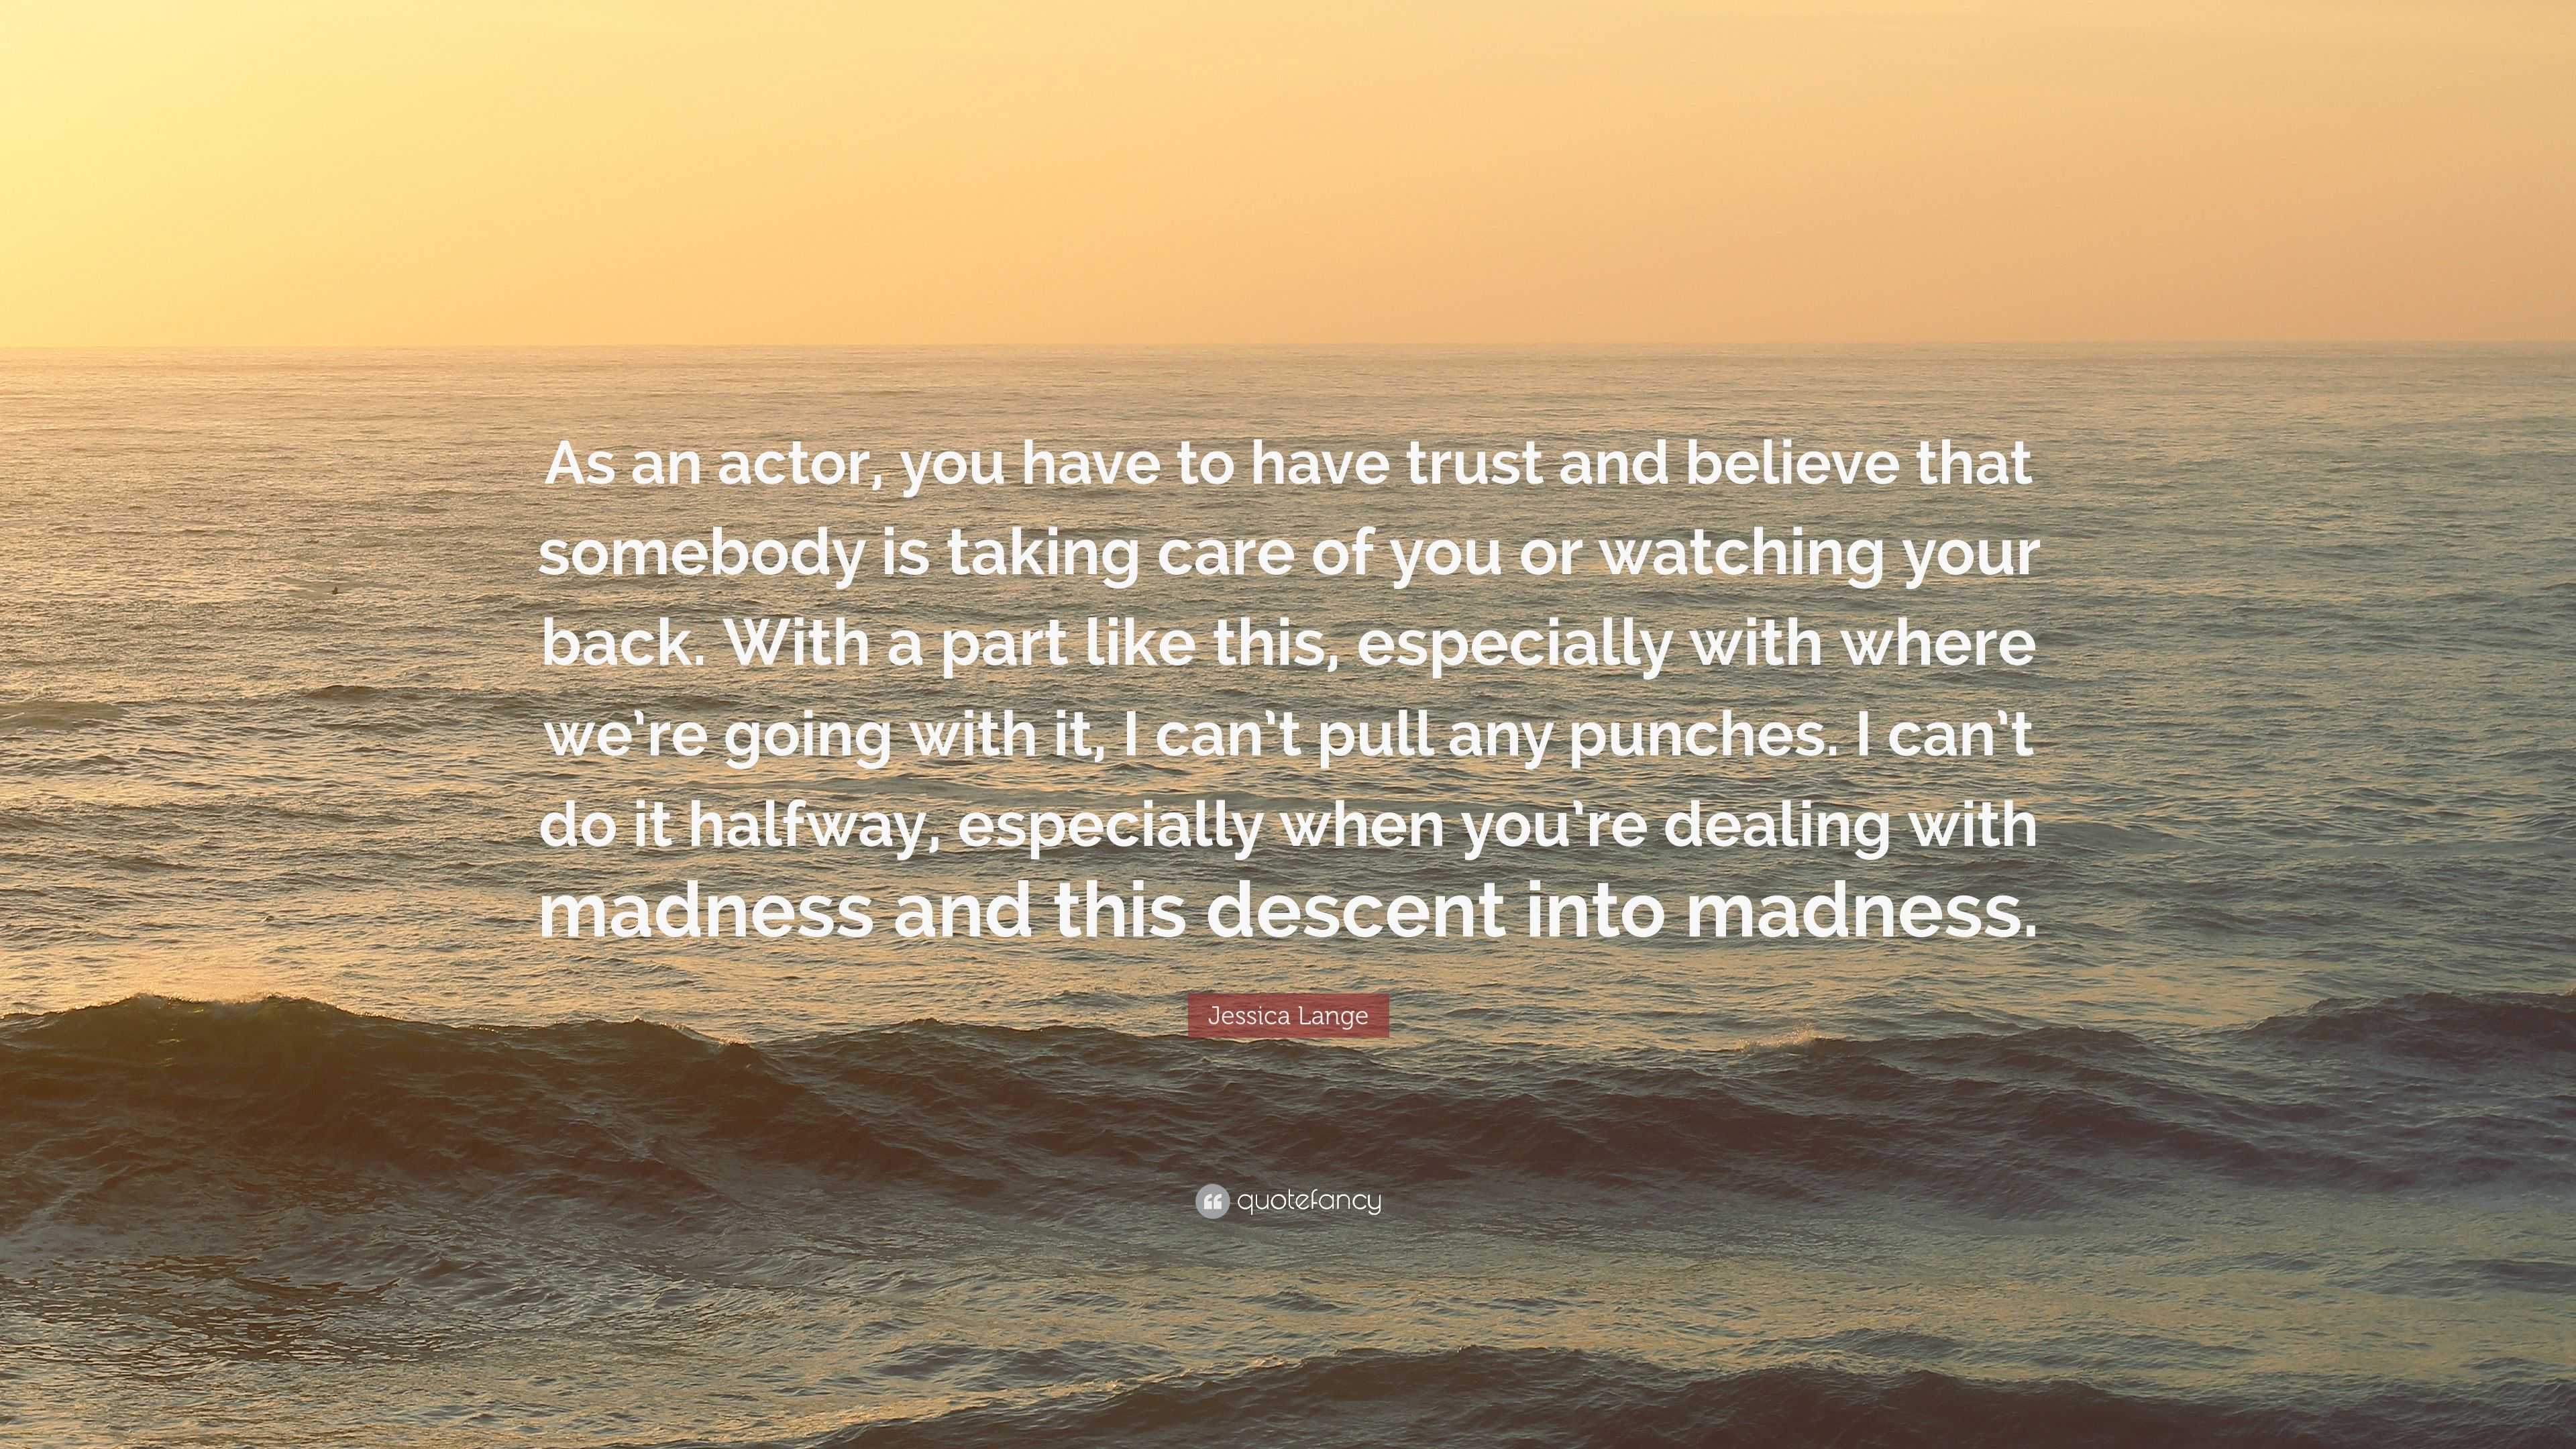 Jessica Lange Quote: “As an actor, you have to have trust and believe ...